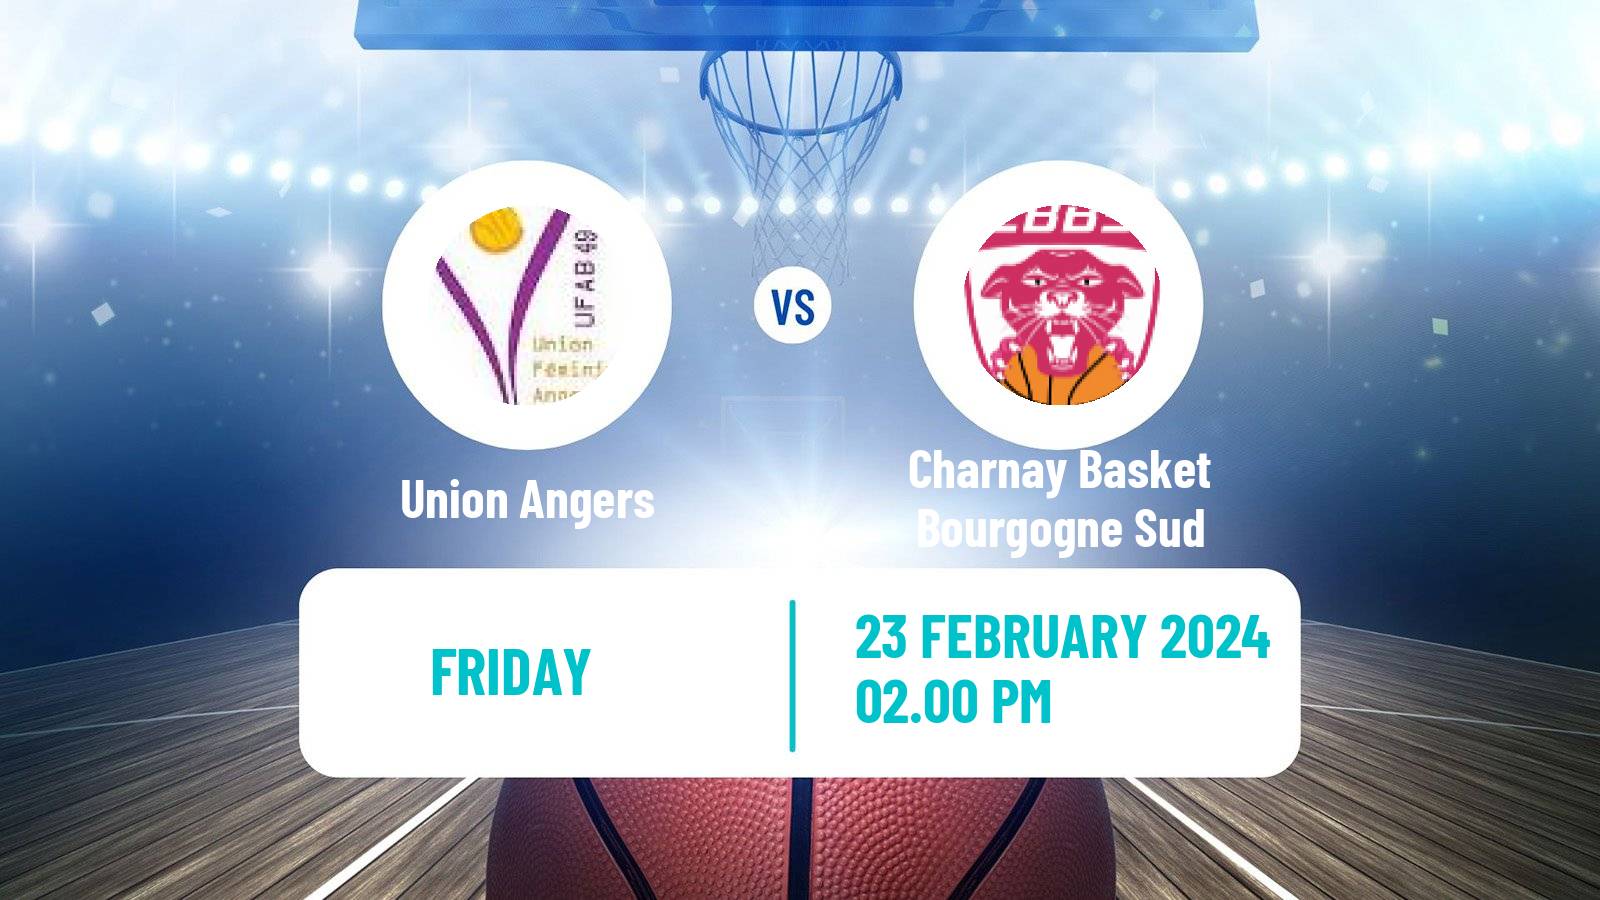 Basketball French LFB Union Angers - Charnay Basket Bourgogne Sud